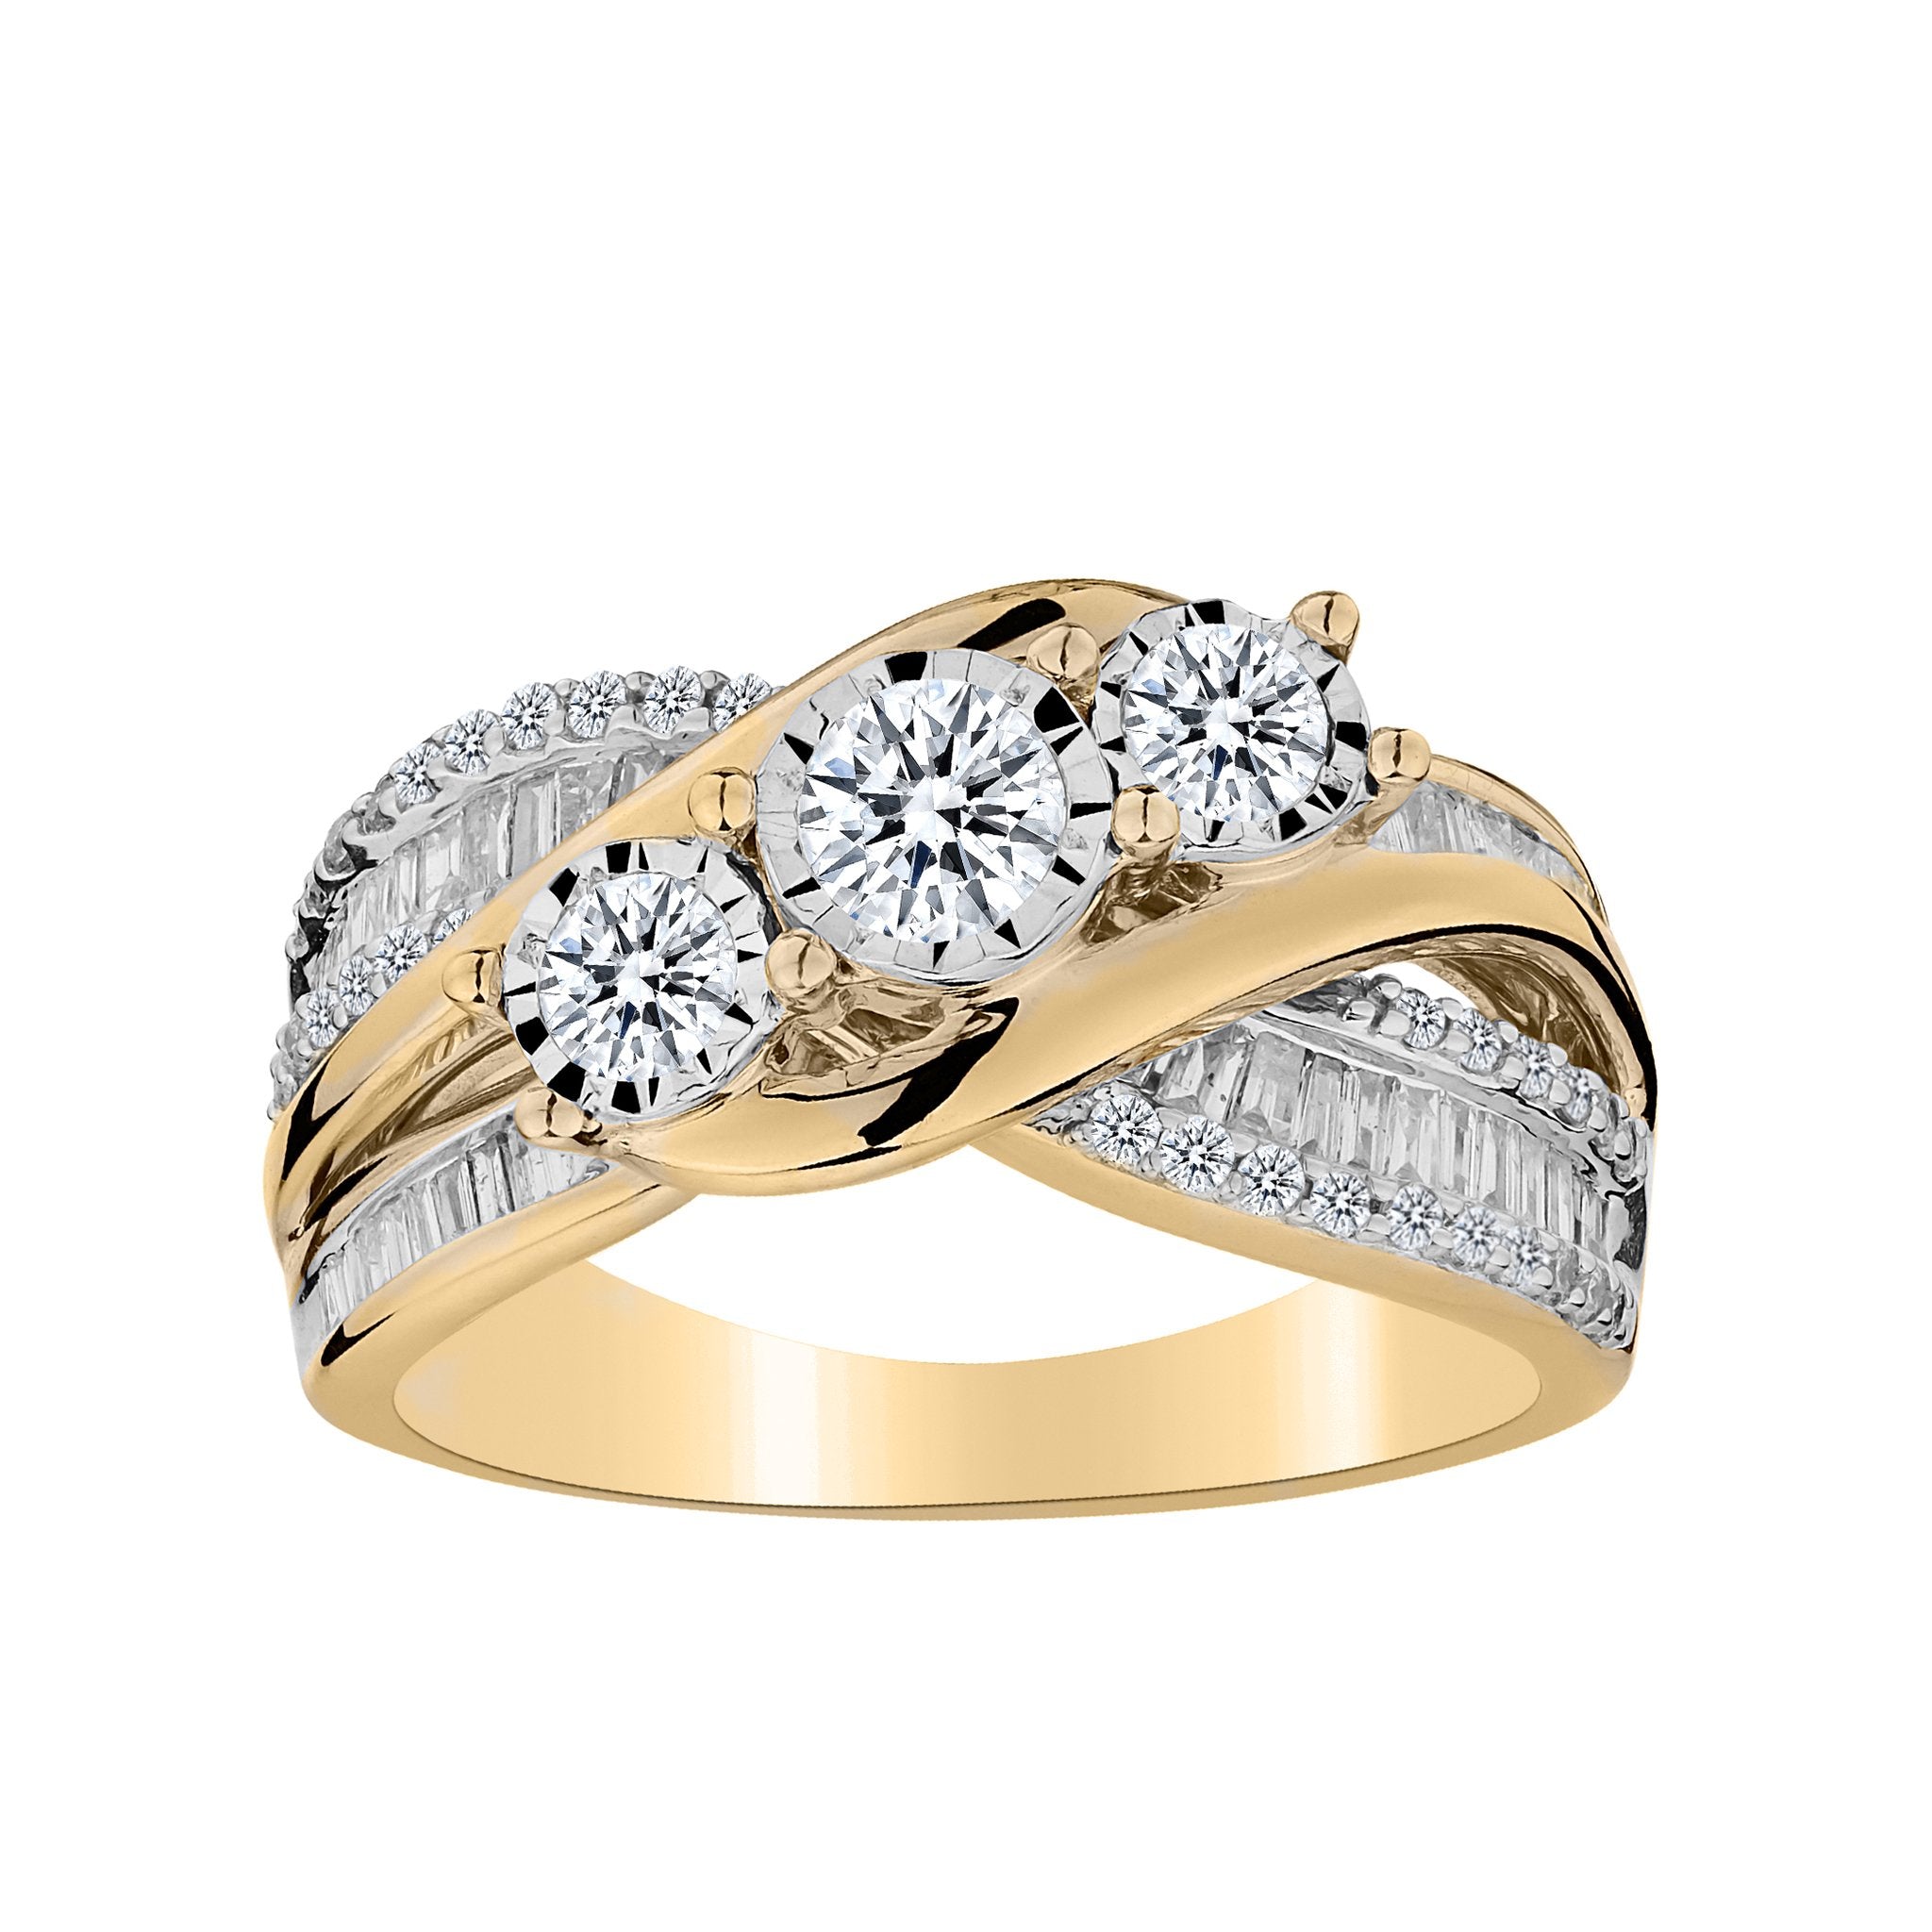 1.00 CARAT DIAMOND "PAST, PRESENT, FUTURE" RING, 10kt YELLOW GOLD…....................NOW - Griffin Jewellery Designs